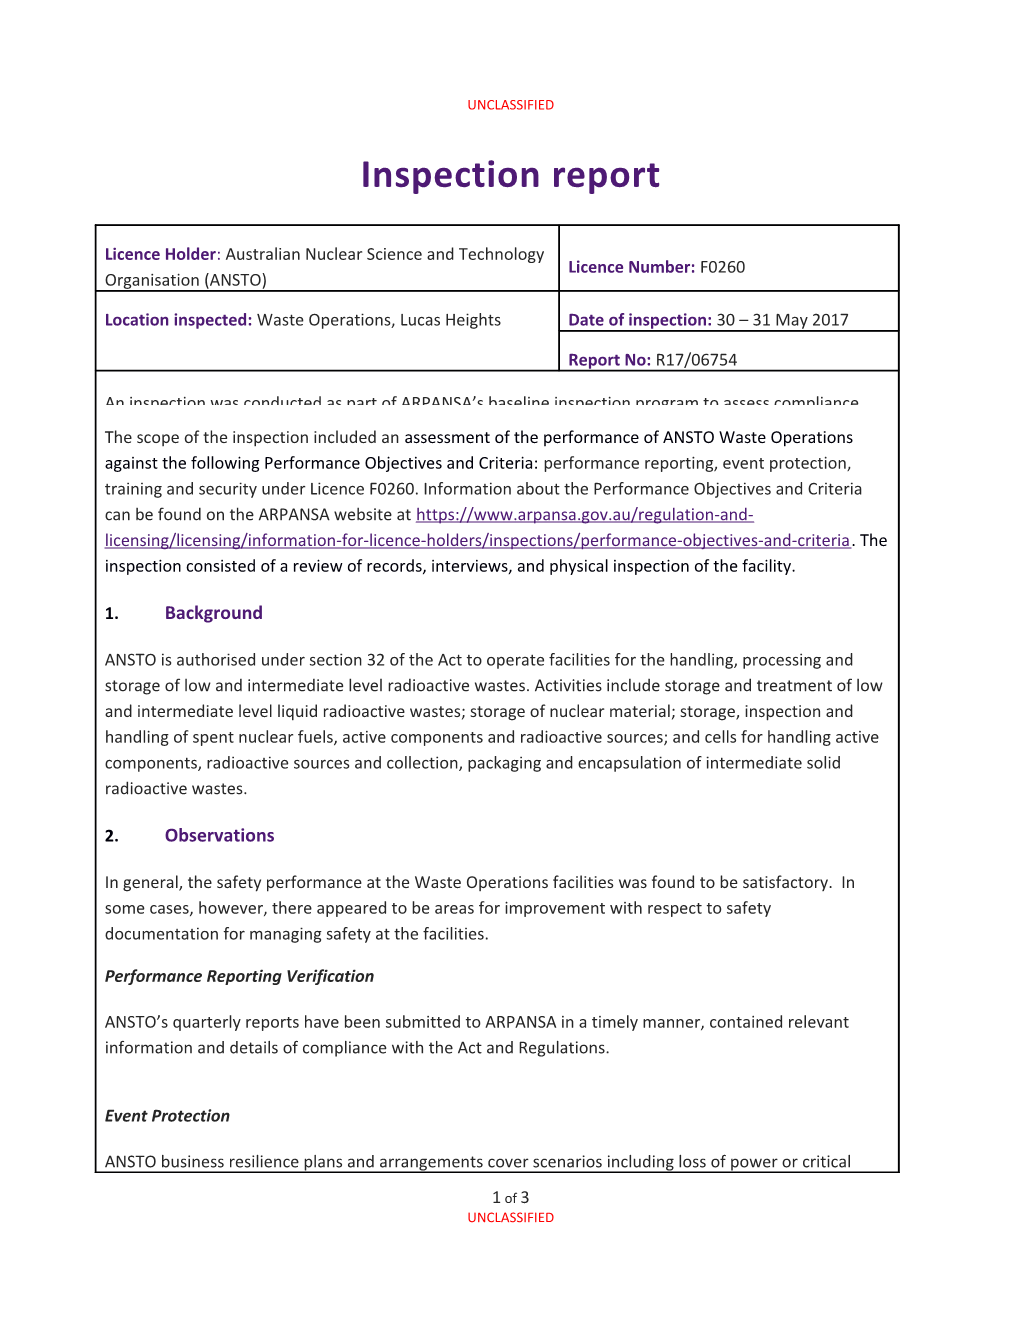 Inspection Report: Australian Nuclear Science and Technology Organisation (ANSTO) - Waste